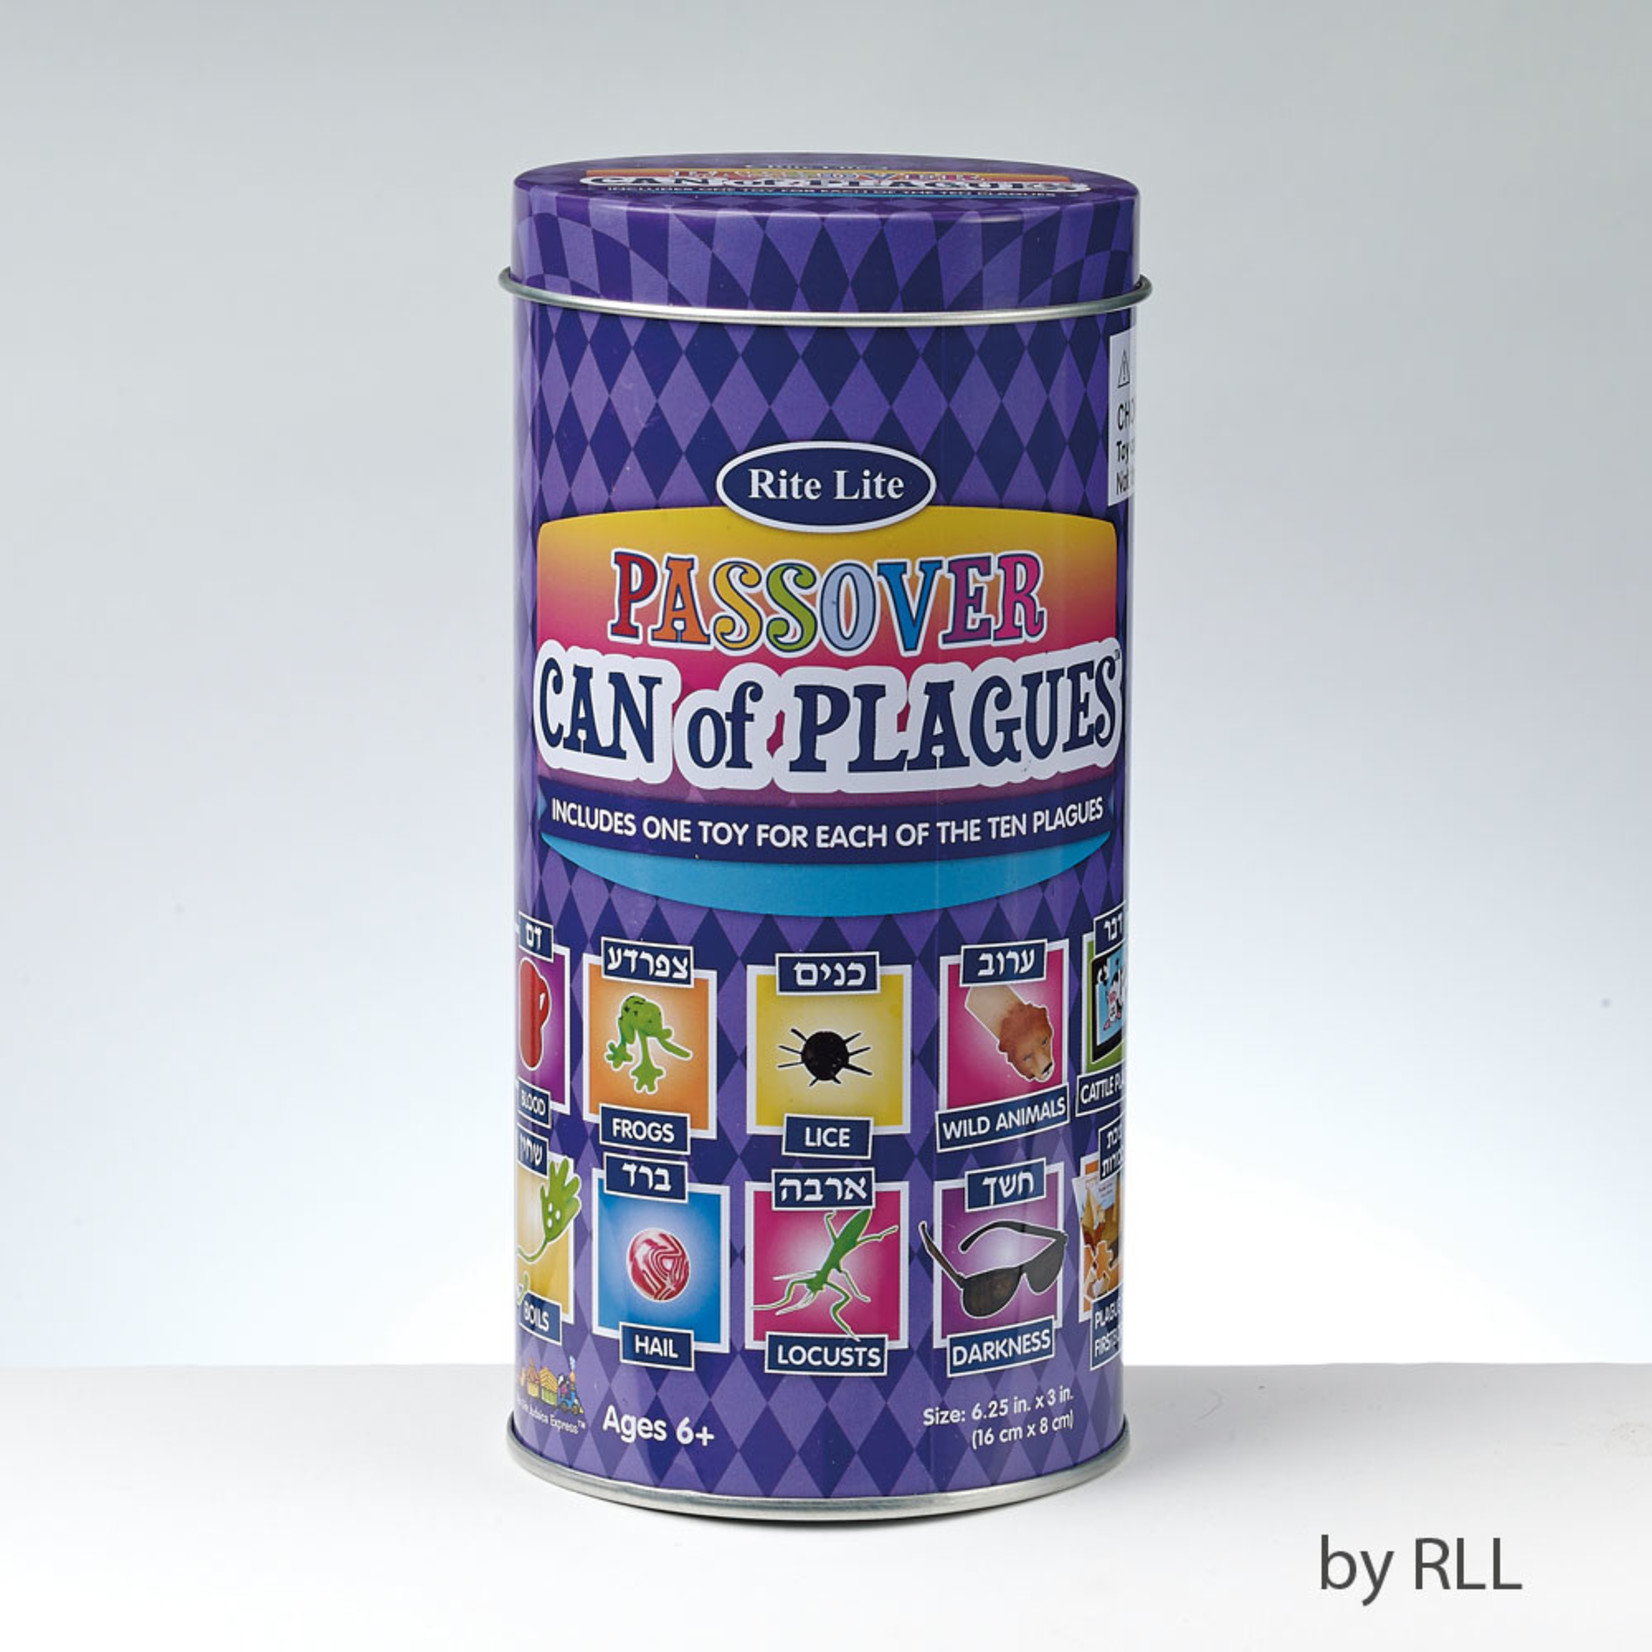 Can of Plagues